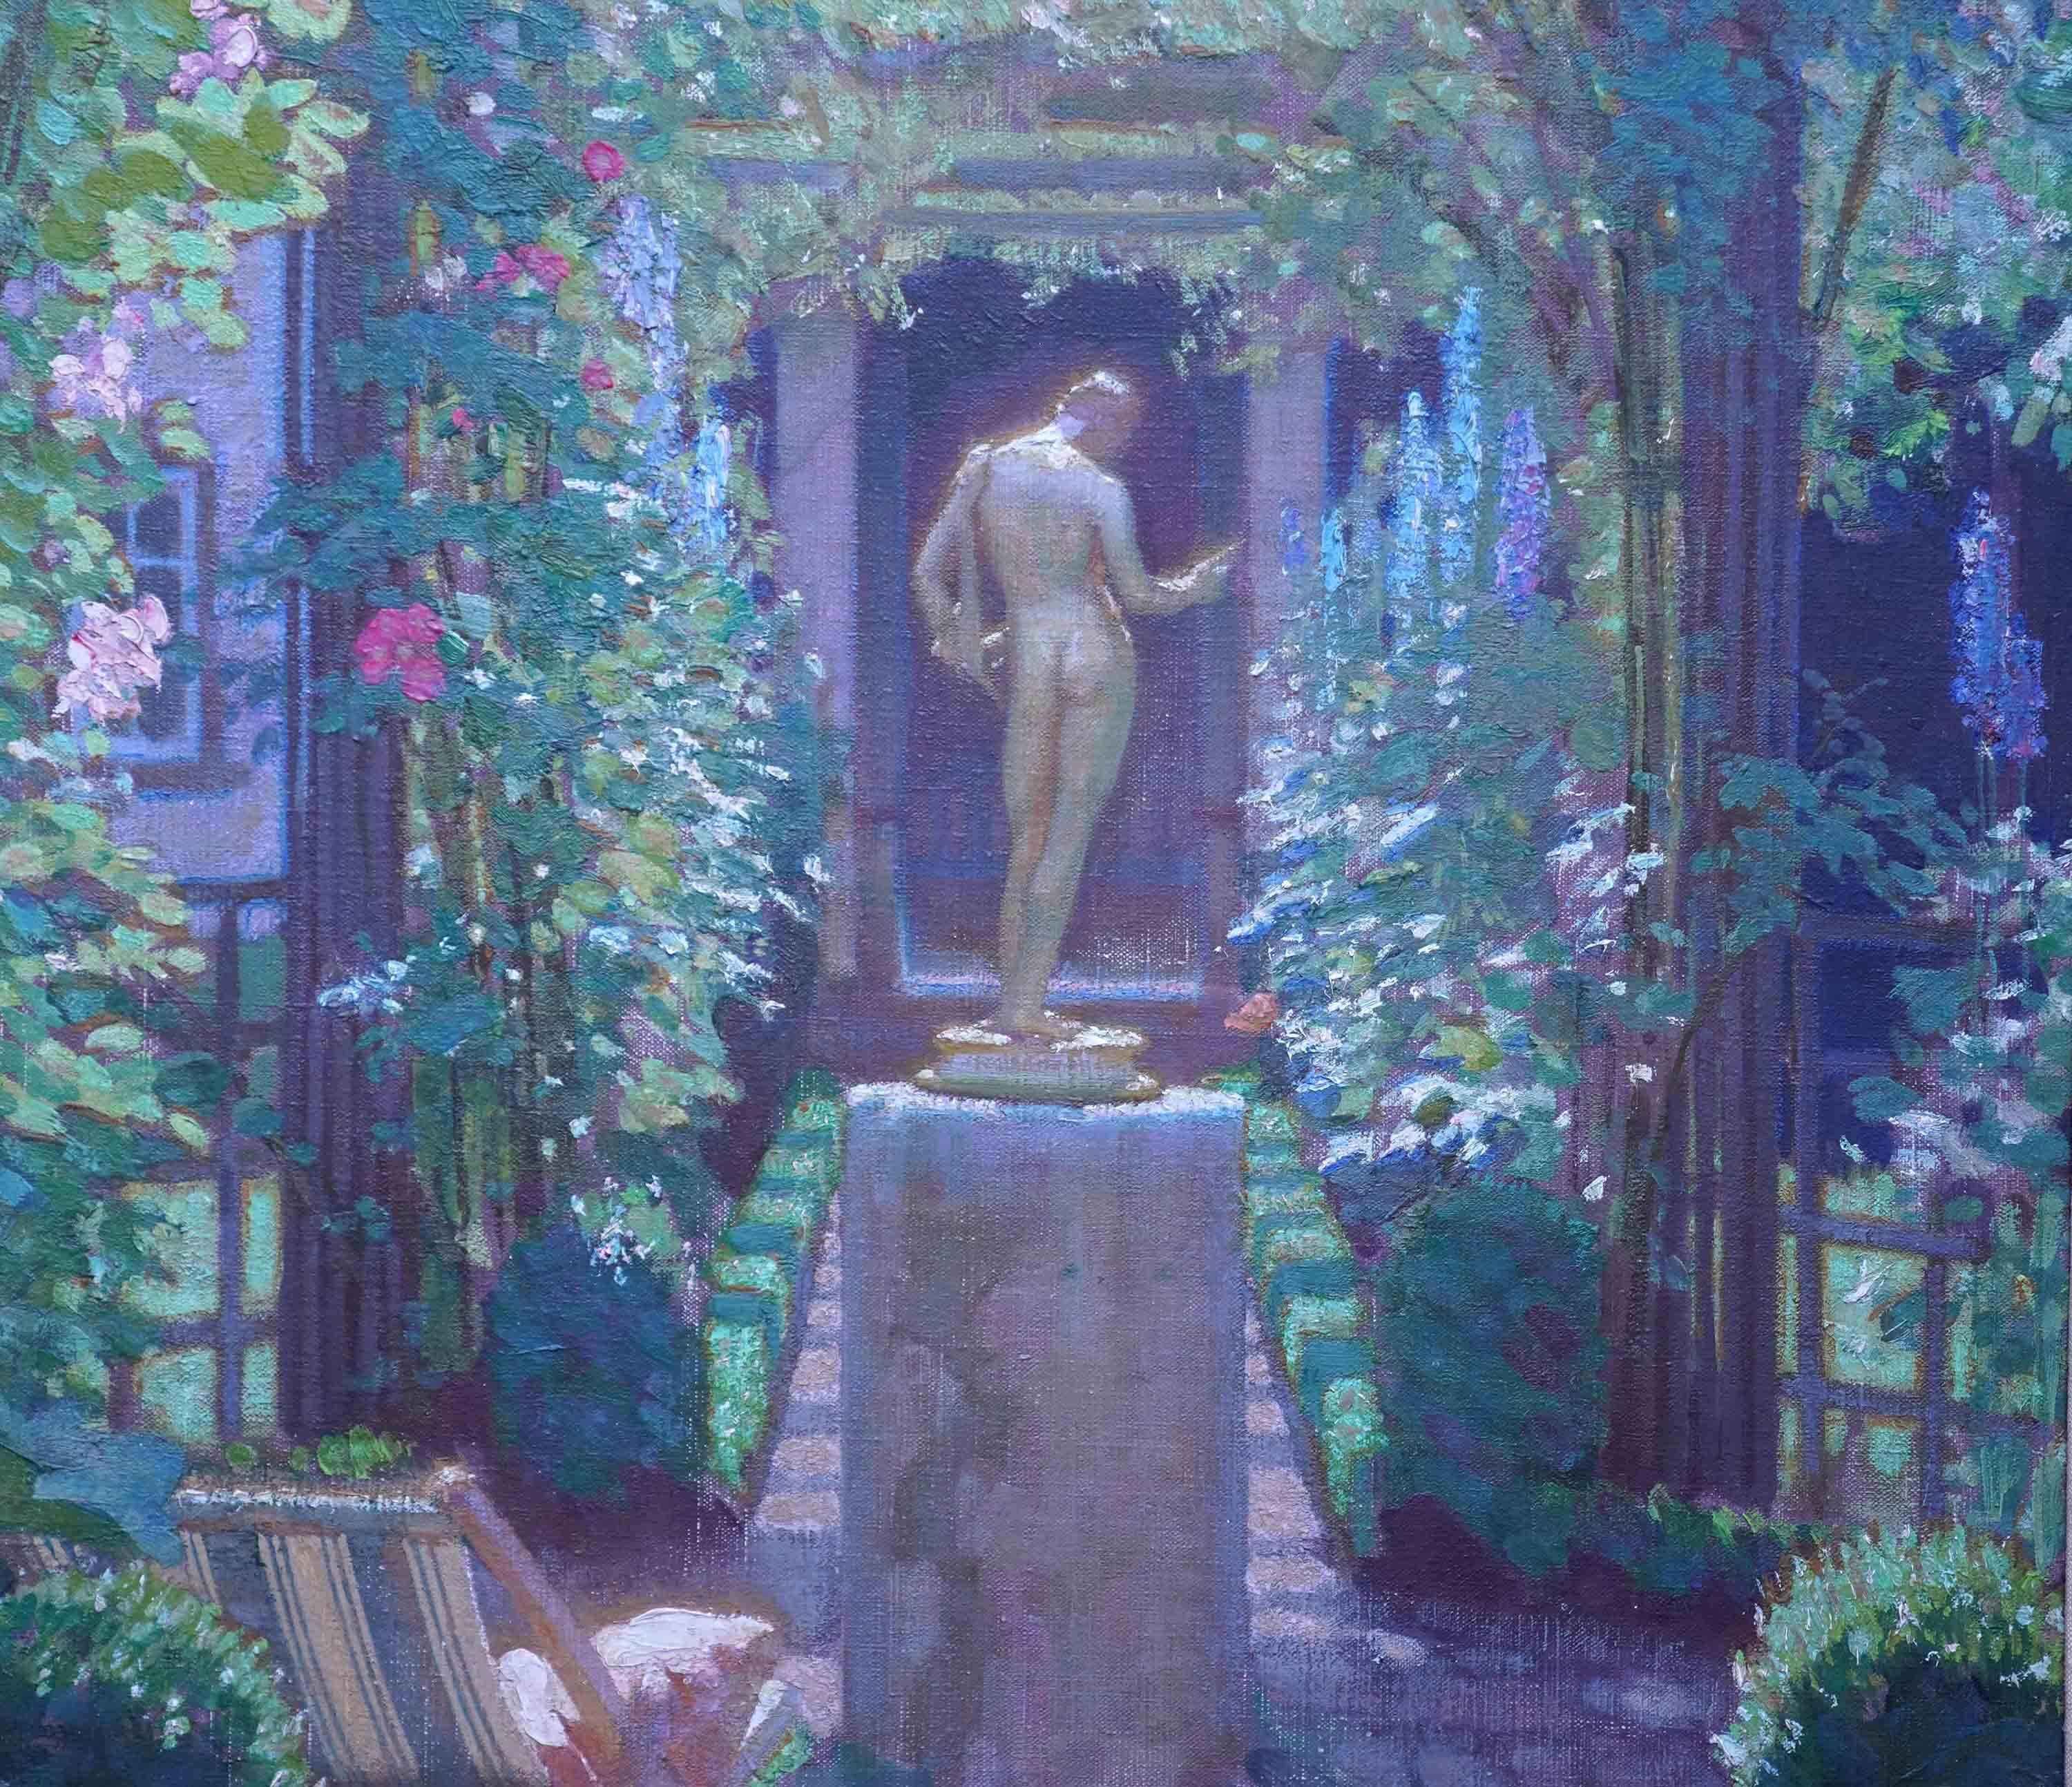 This lovely British 1930's Impressionist garden landscape oil painting is by noted artist Harold Speed. Painted circa 1932 it is a view through a rose covered pergola towards a house. In the foreground is a classical statue on a plinth and a deck